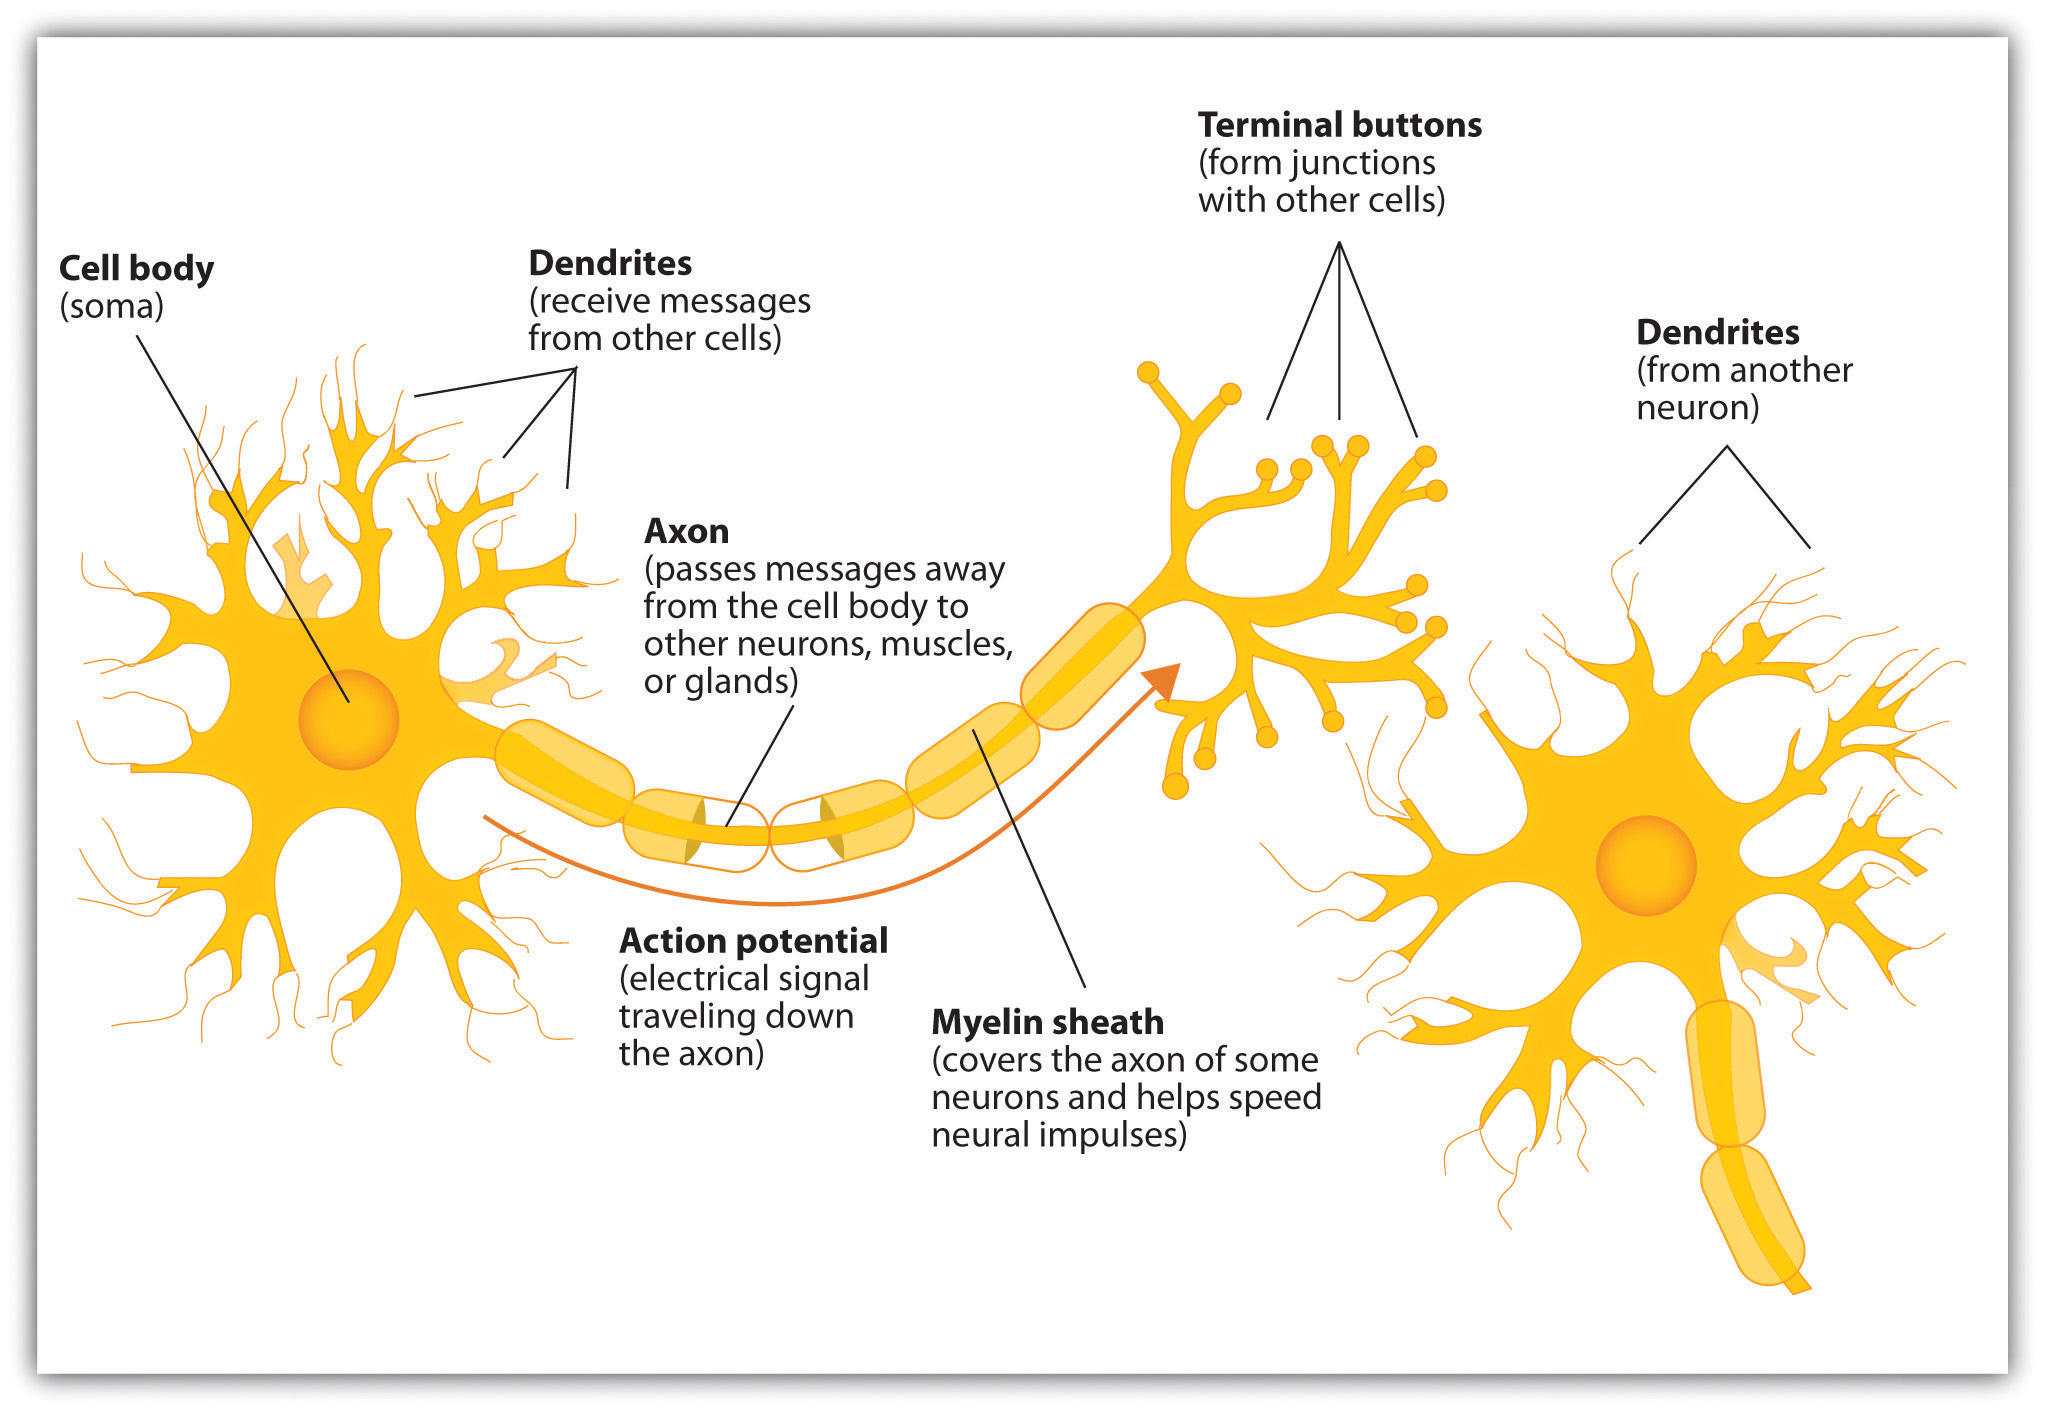 Components of the Neuron.